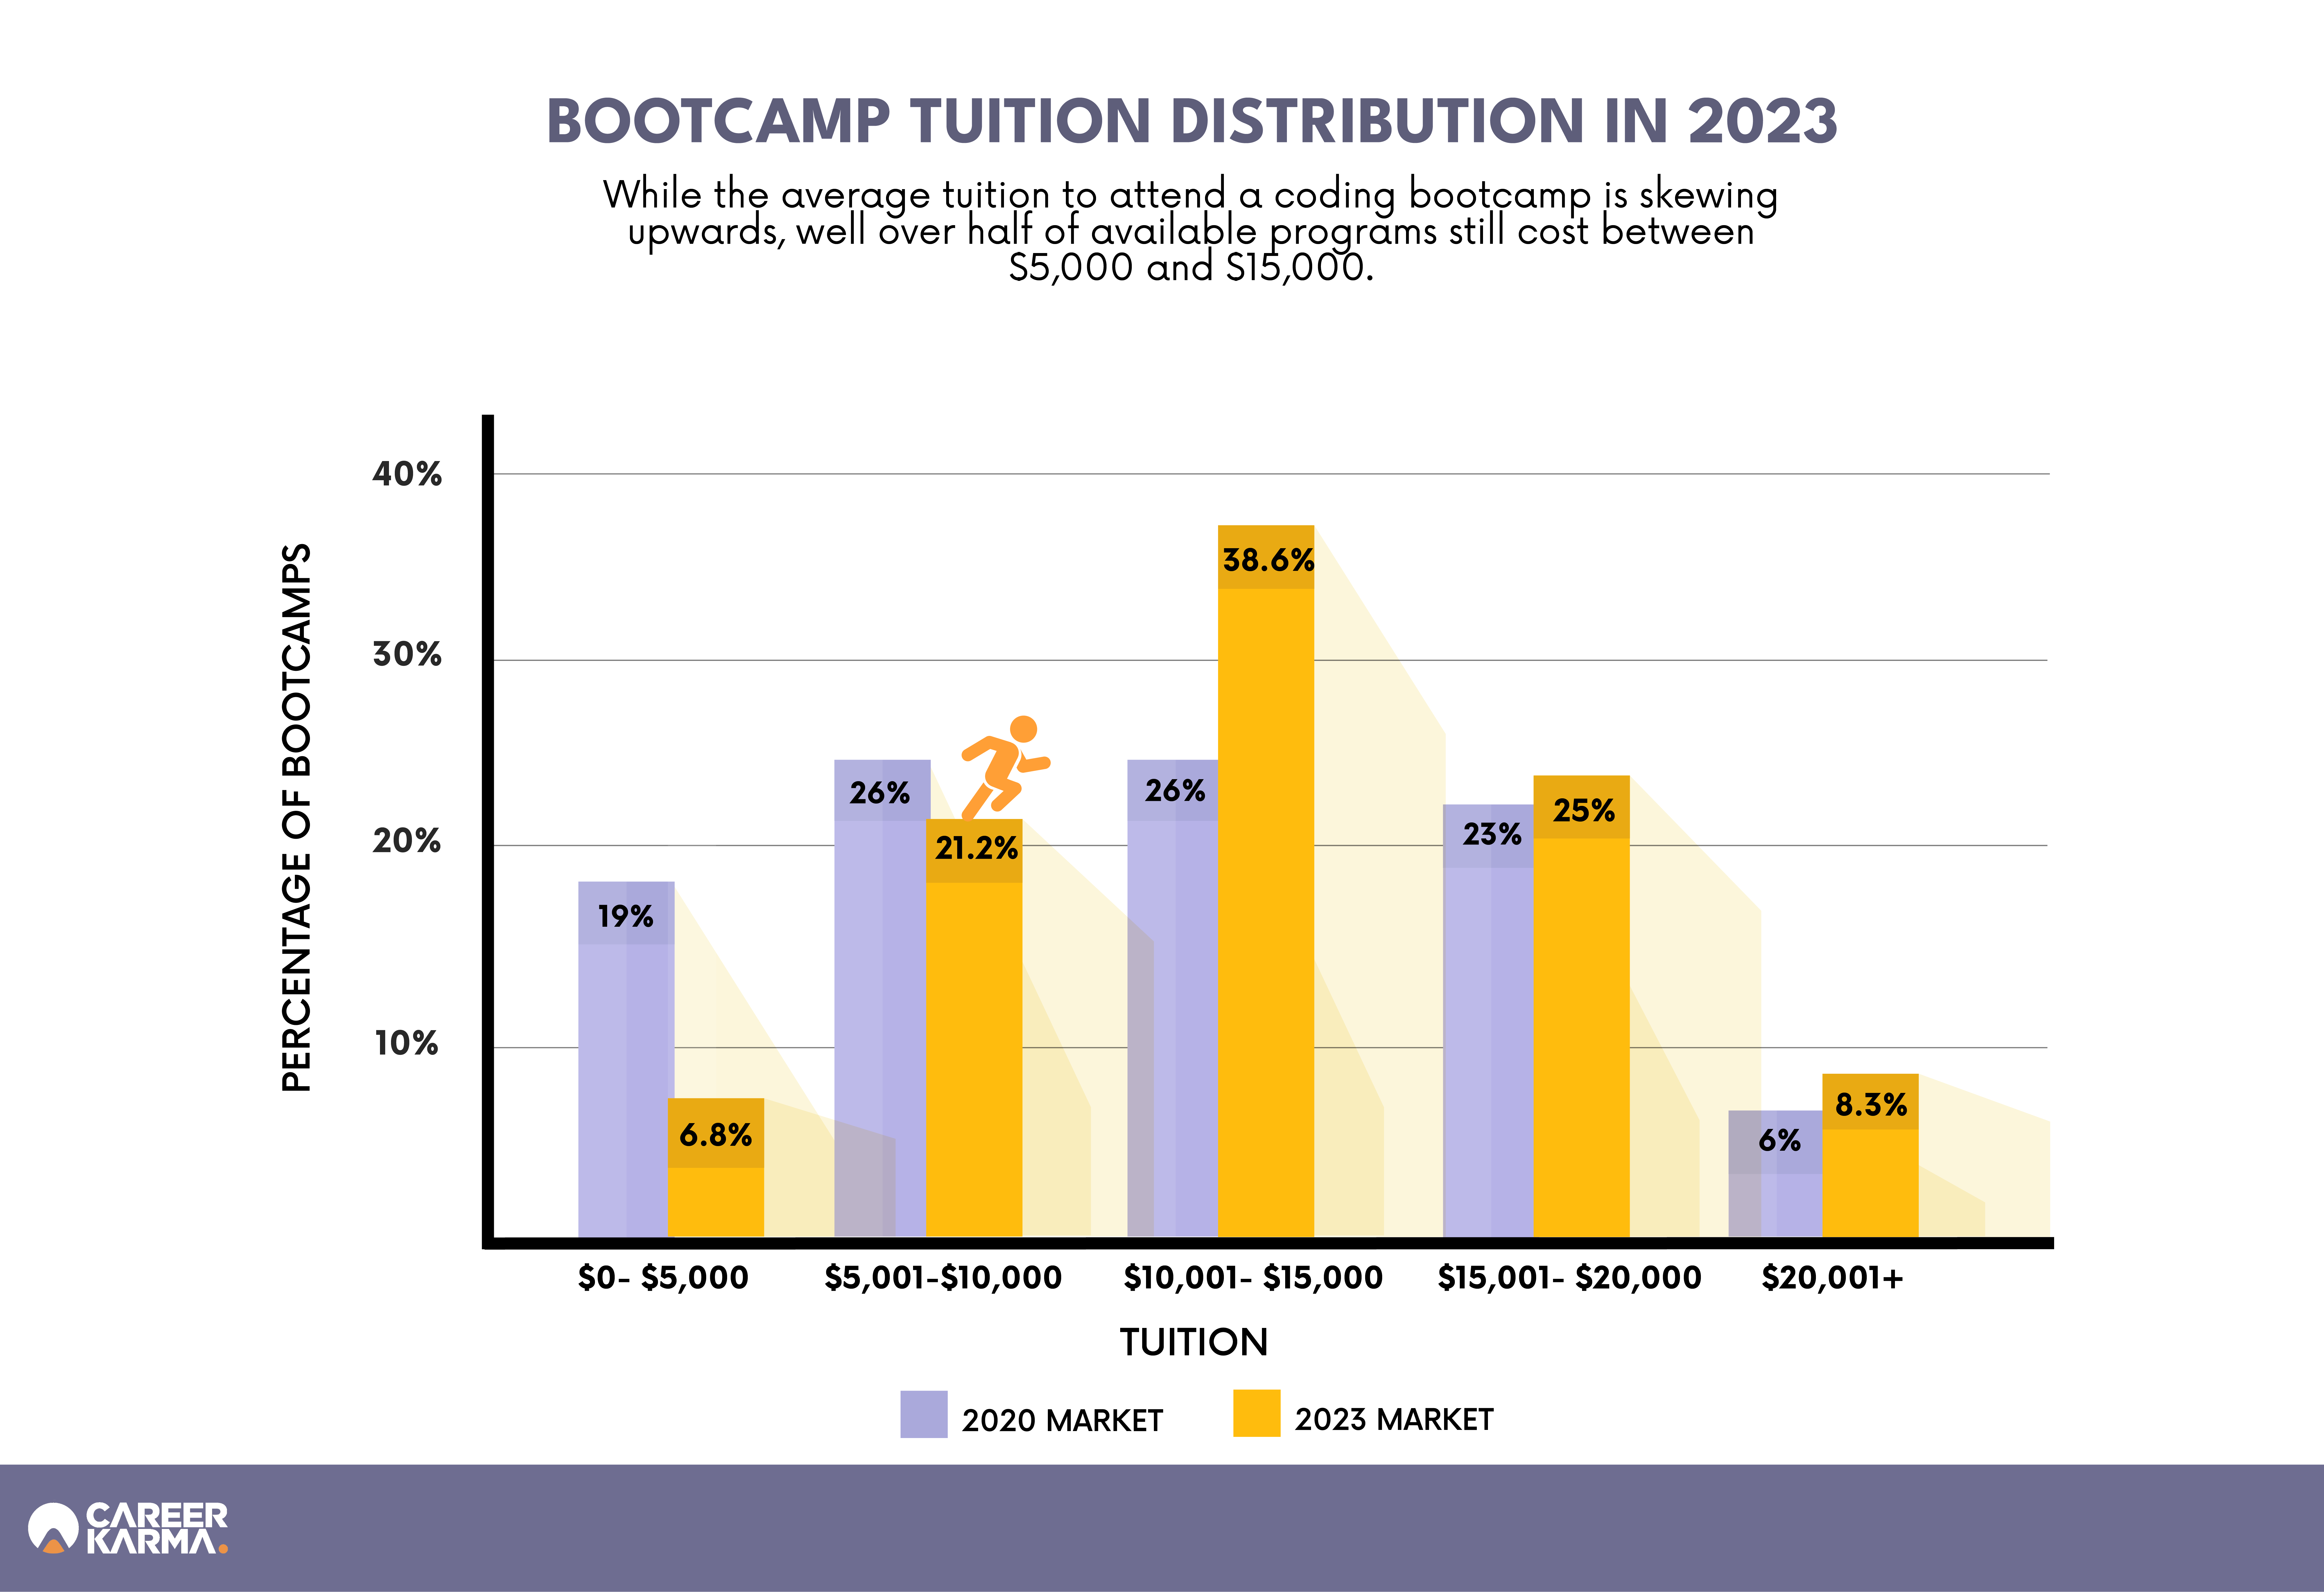 AW6 REVISED BootcampTuitionFee 01 01